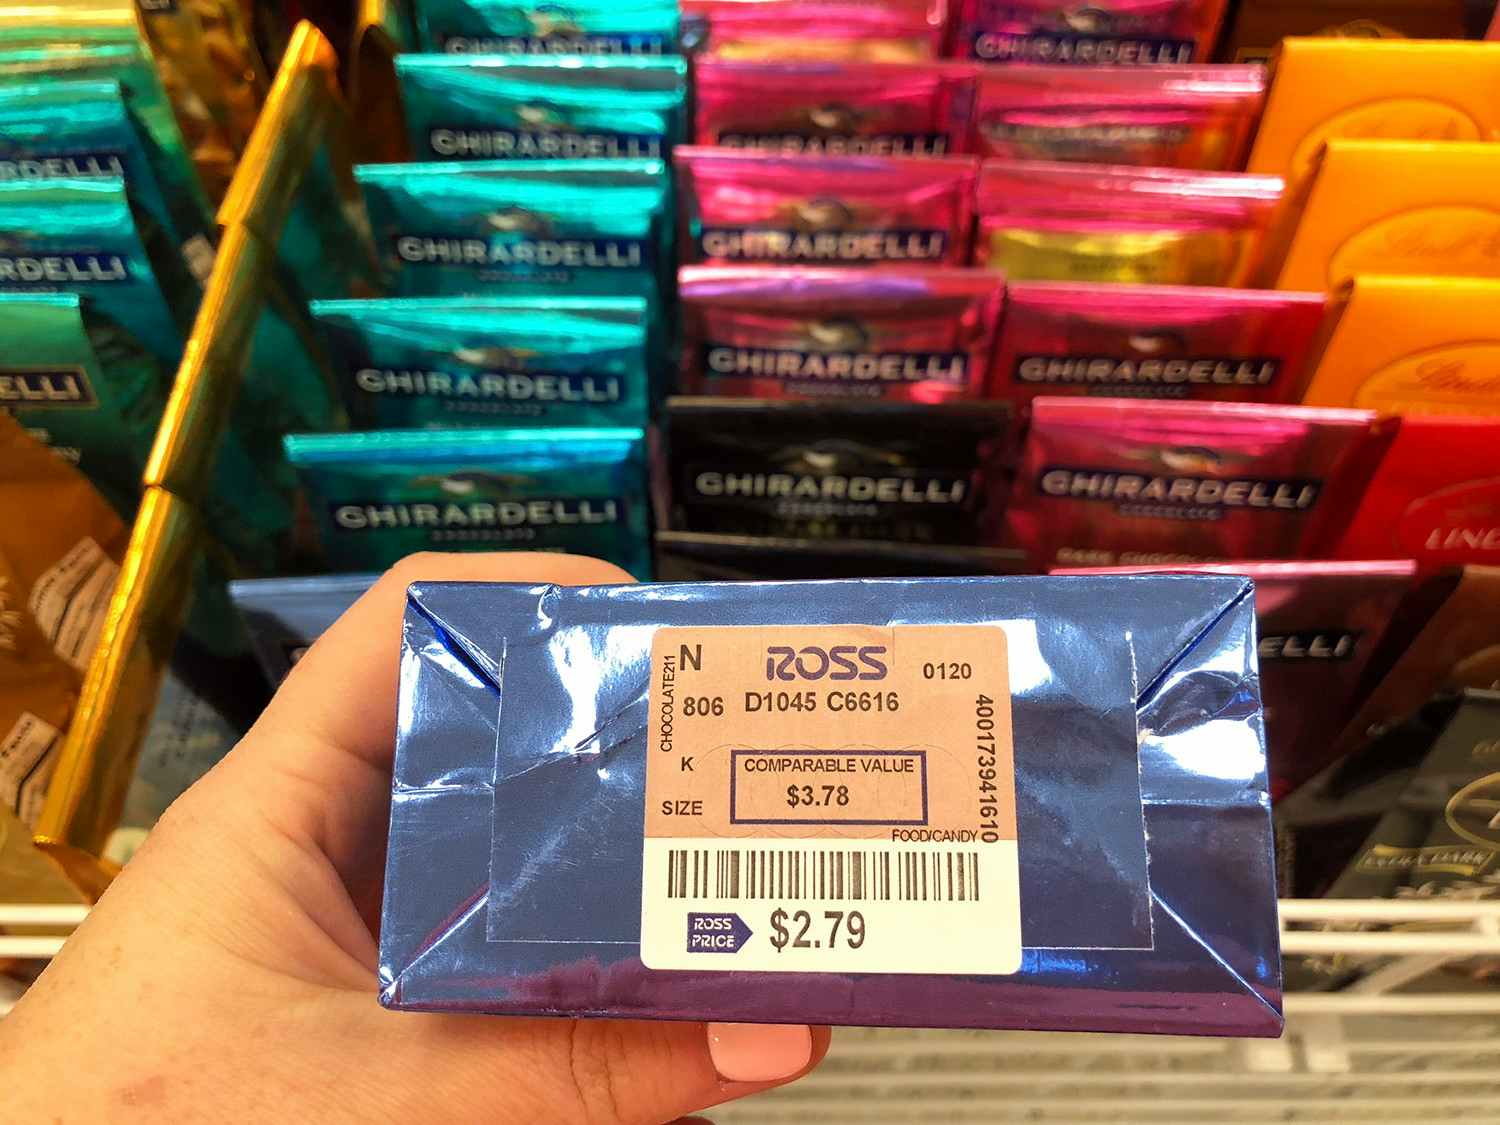 Ghirardelli squares at Ross checkout are actually a good deal. Walmart sells for $3.78.